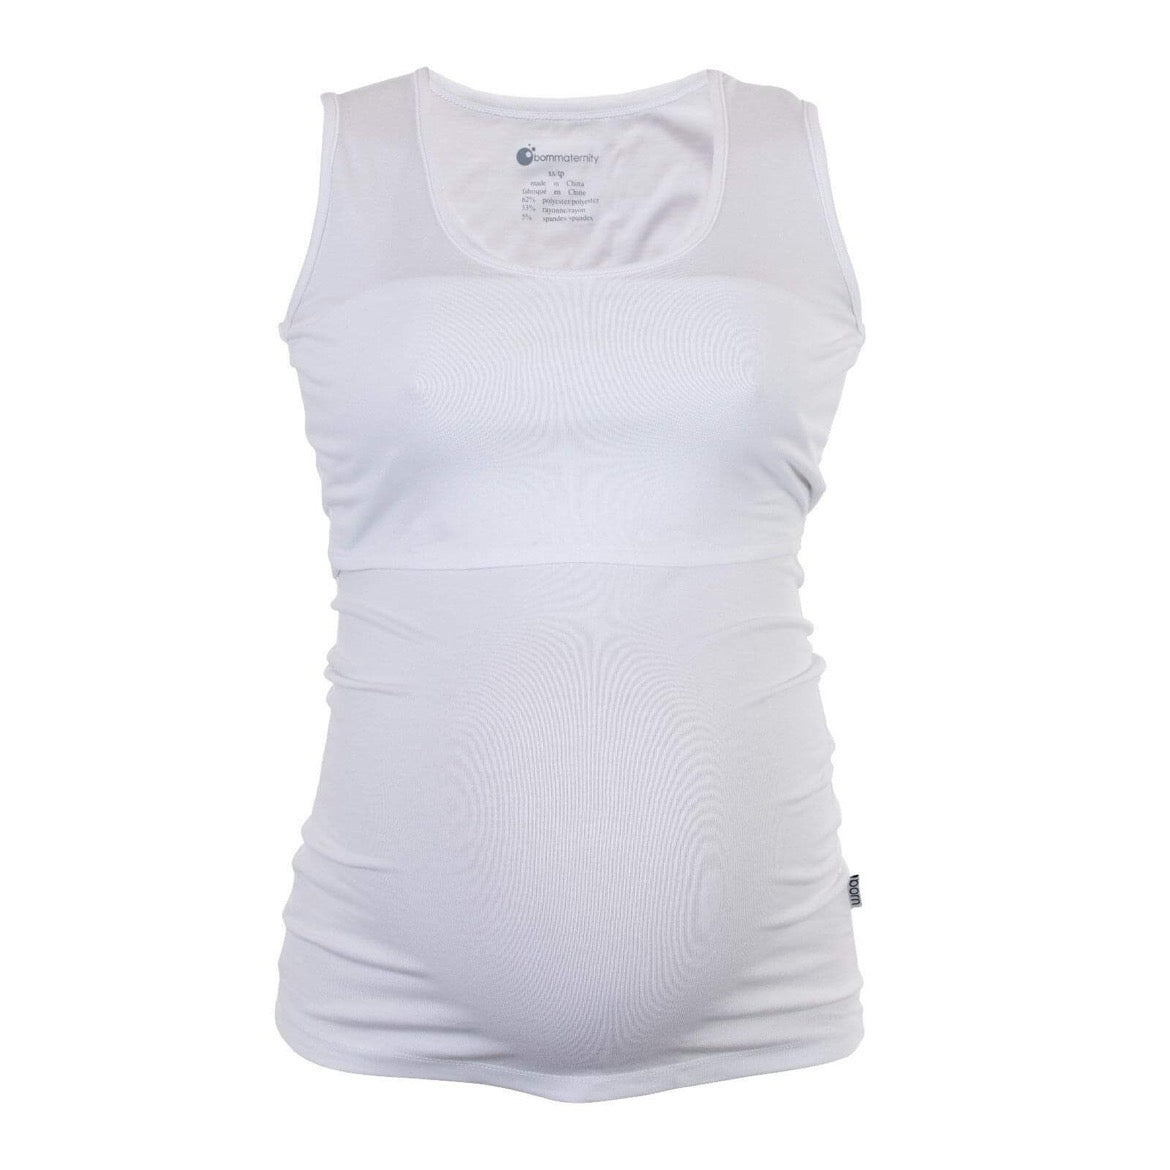 Born Maternity Casual Comfy Affordable Quality Feeding Singlet Top White